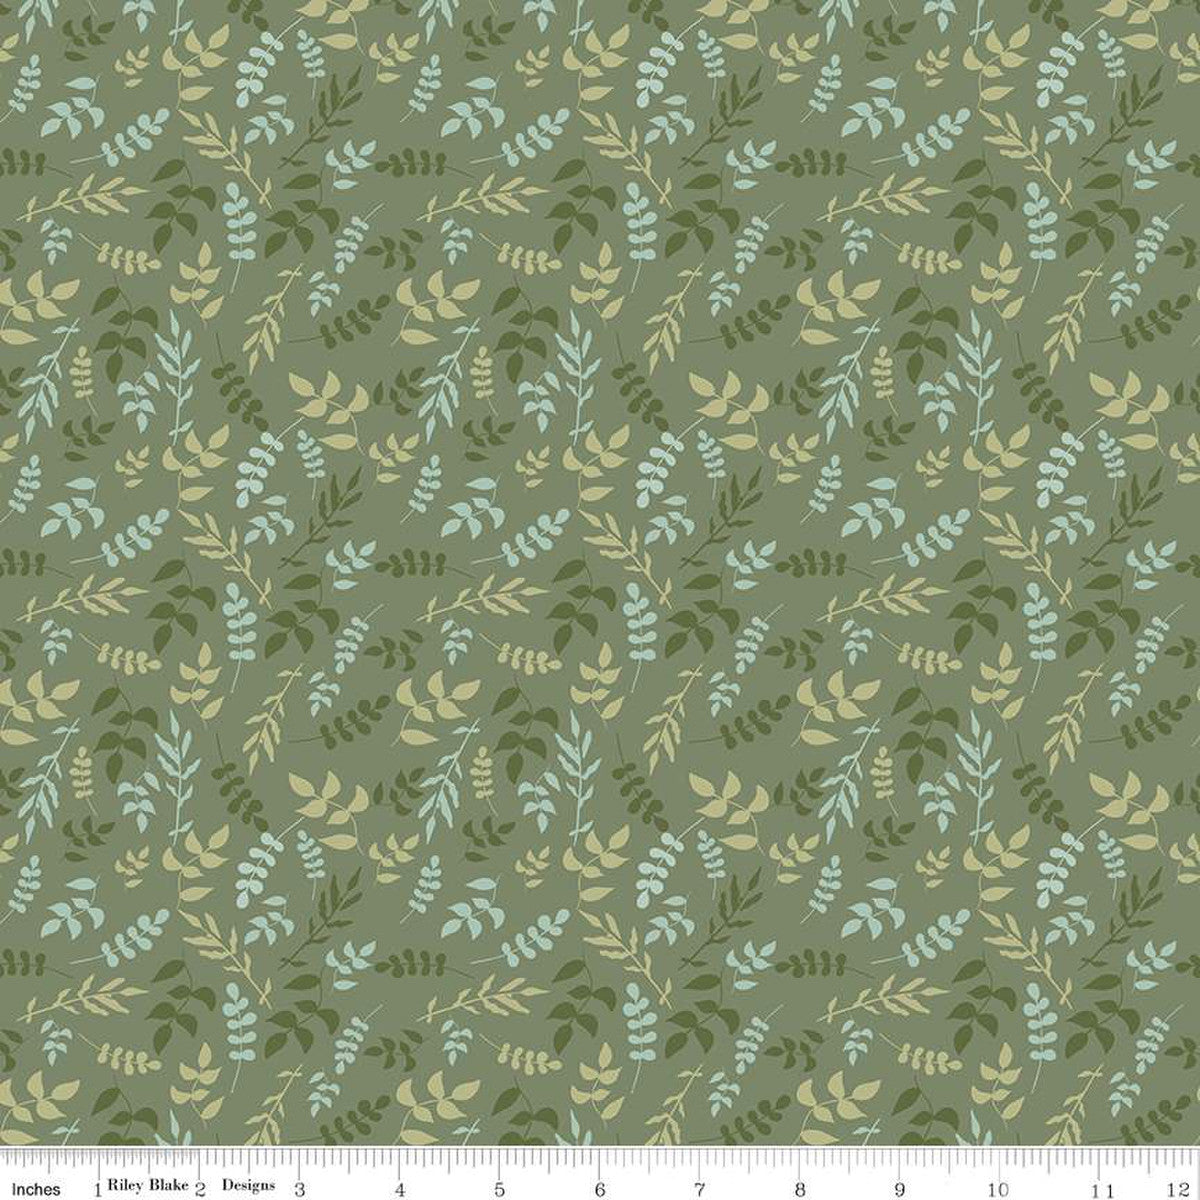 Wild and Free by Gracey Larson for Riley Blake Designs  quilt weight cotton fabric for quilting sewing garments bags olive green background with tone on tone shades of green leaves